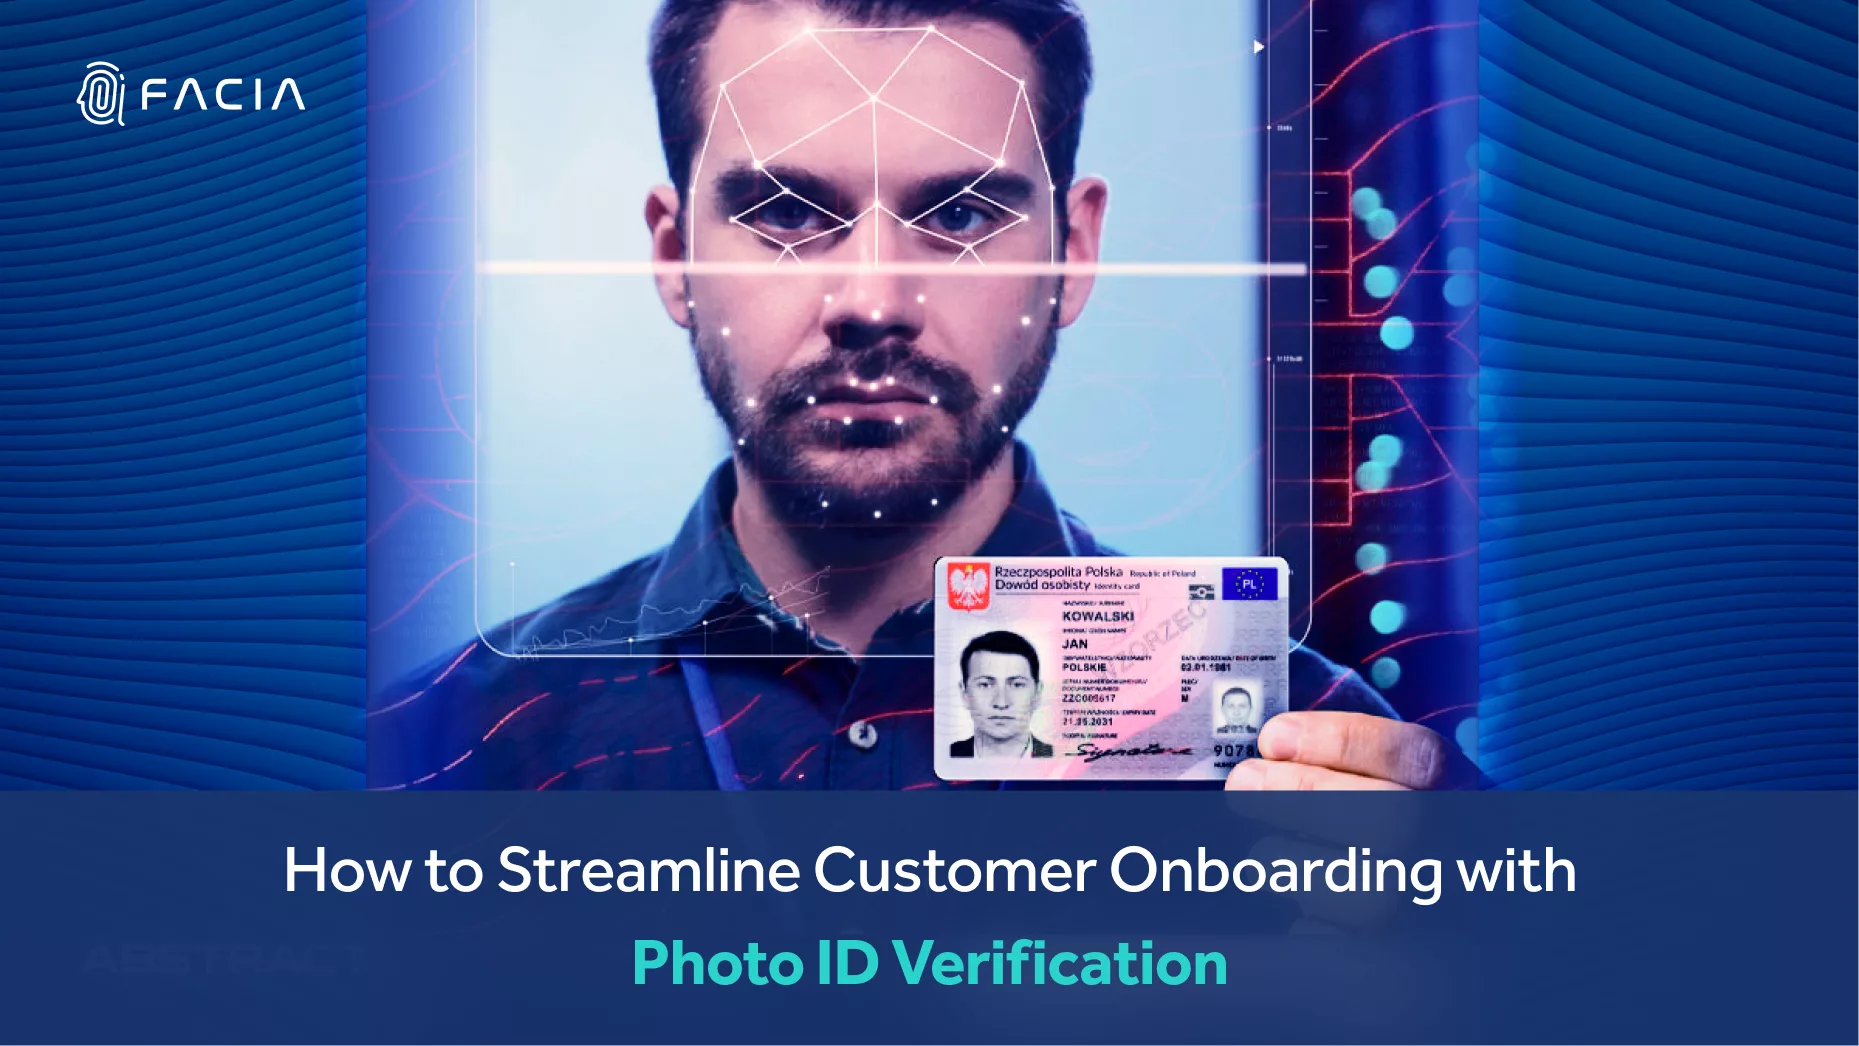 How to Streamline Customer Onboarding with Photo ID Verification